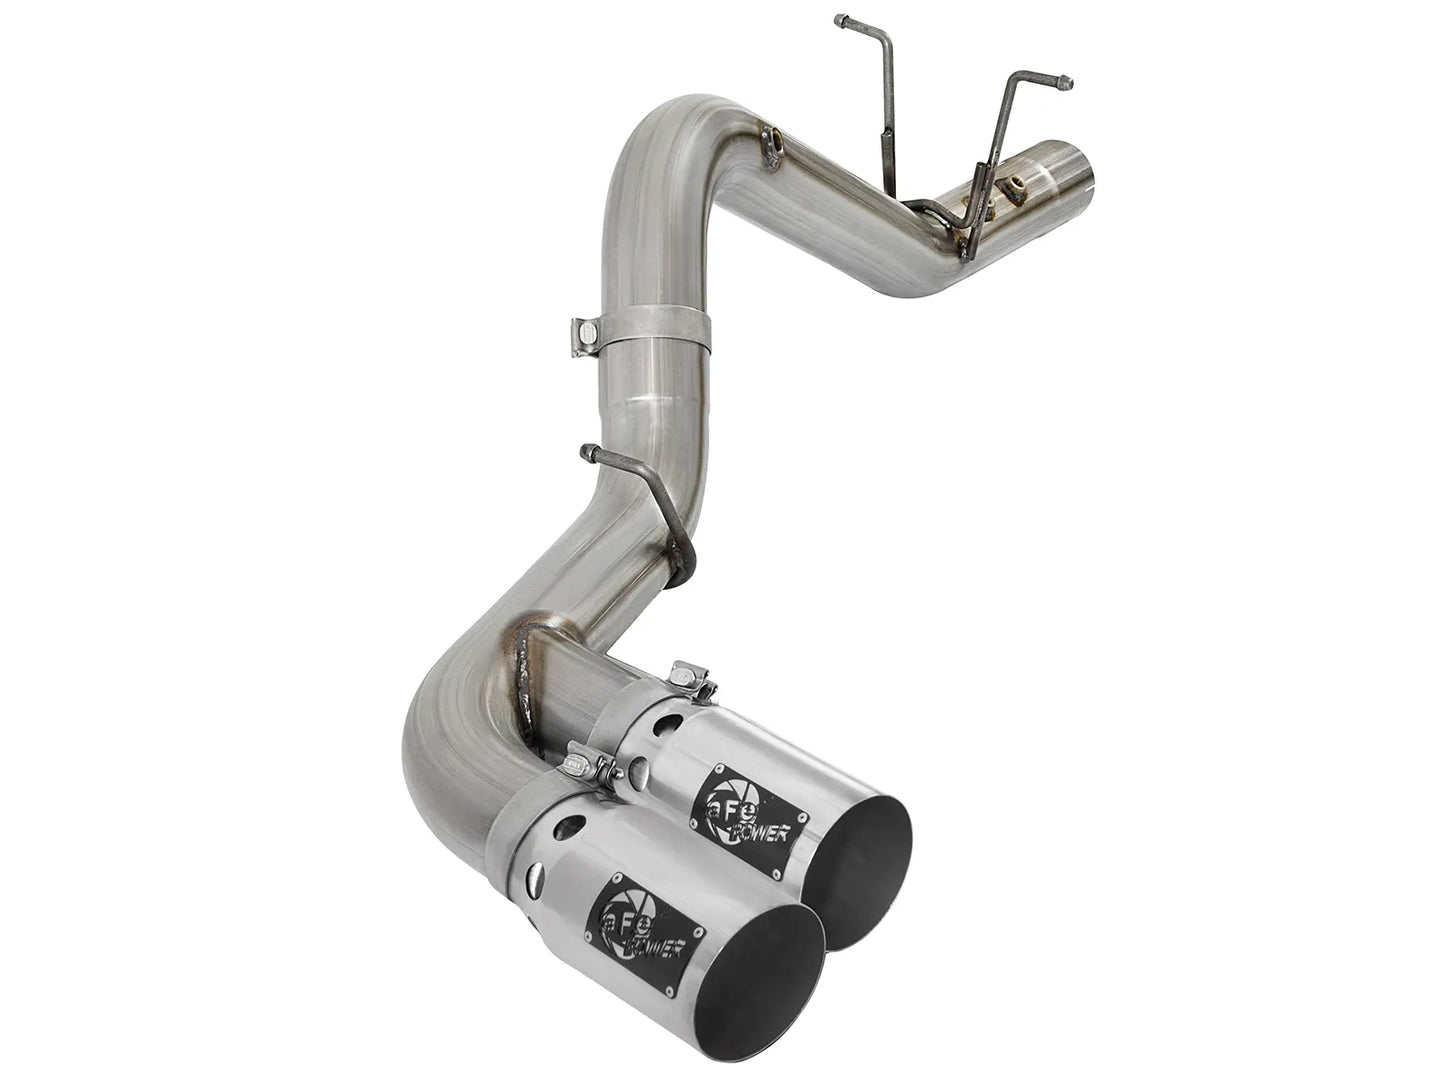 aFe Rebel XD Series DPF-Back Exhaust System for 2017-2019 GM Trucks (49-44089-P)